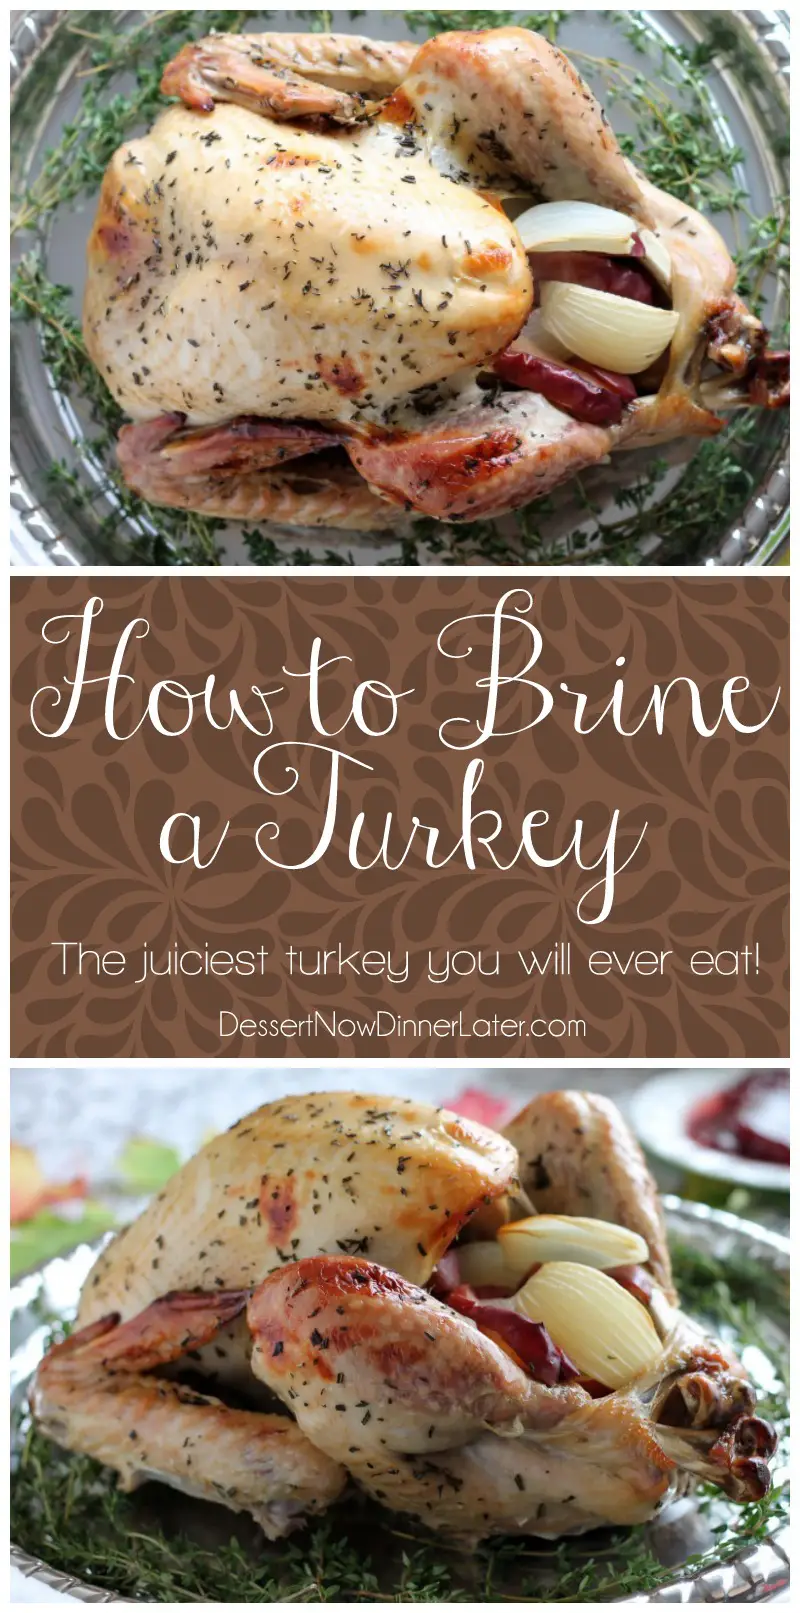 Step-by-step photo instructions on how to brine and cook a turkey to juicy perfection! From DessertNowDinnerLater.com